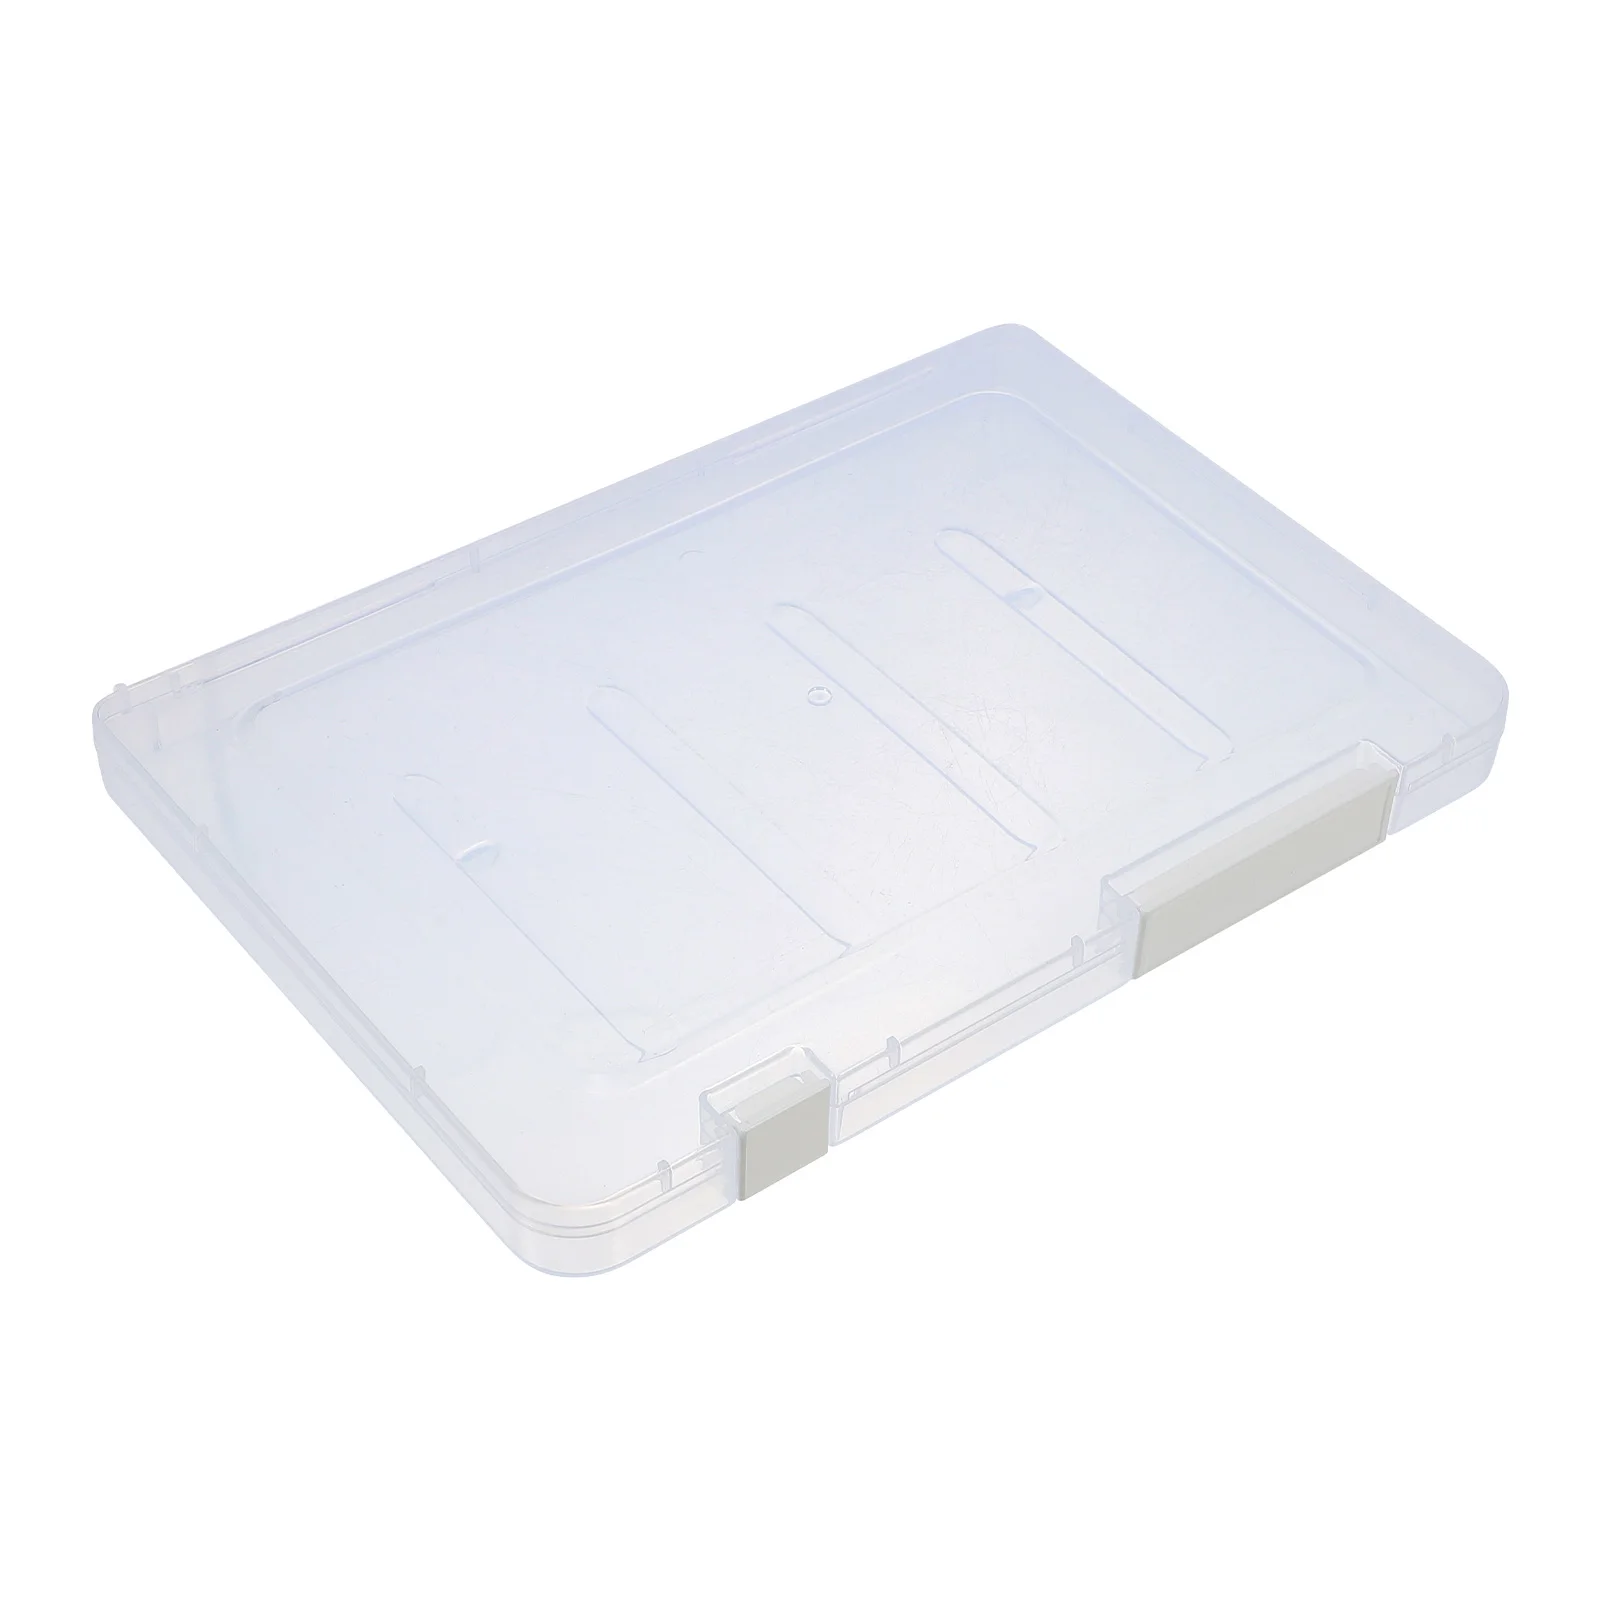 

A4 A5 Paper File Document Storage Box Desktop Storage Holder Transparent Container Clipboard File Box Case For Office School